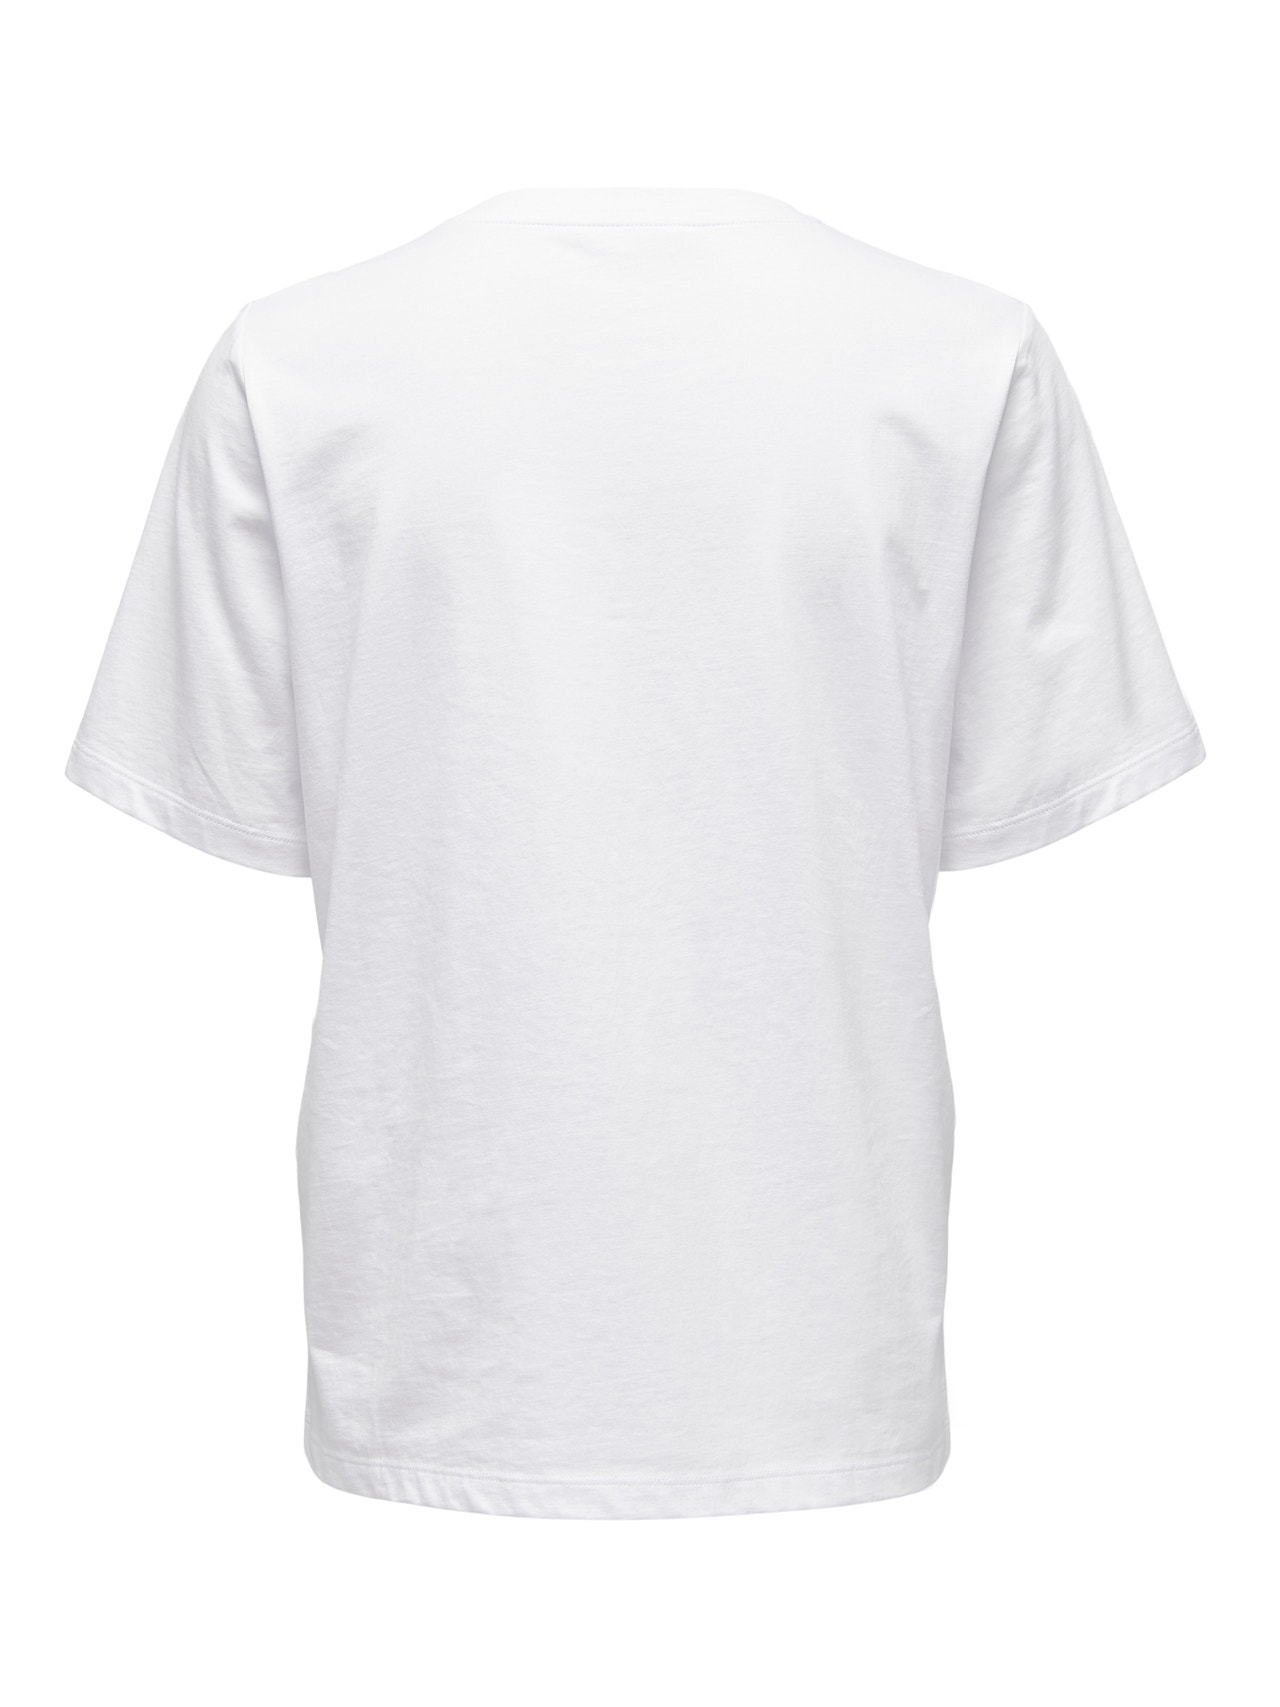 ONLY Basic solid color t-shirt -White - 15270390